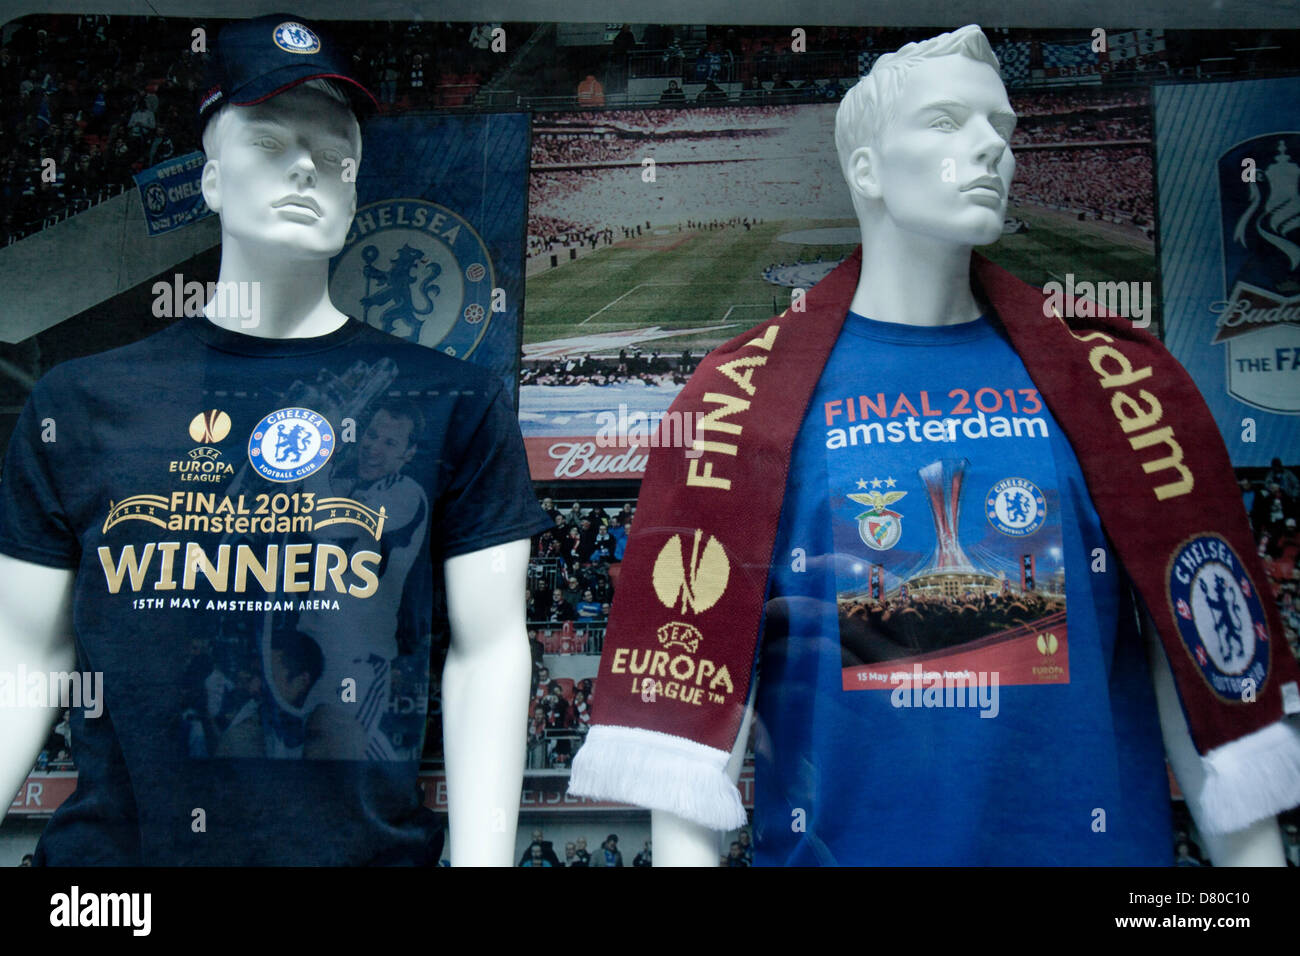 London UK. 16th May 2013. Mannequins dressed Europa League winners shirts at the Chelsea store after Chelsea FC wins the Europa League final against Benfica in Amsterdam on May 15th. Credit:  amer ghazzal / Alamy Live News Stock Photo